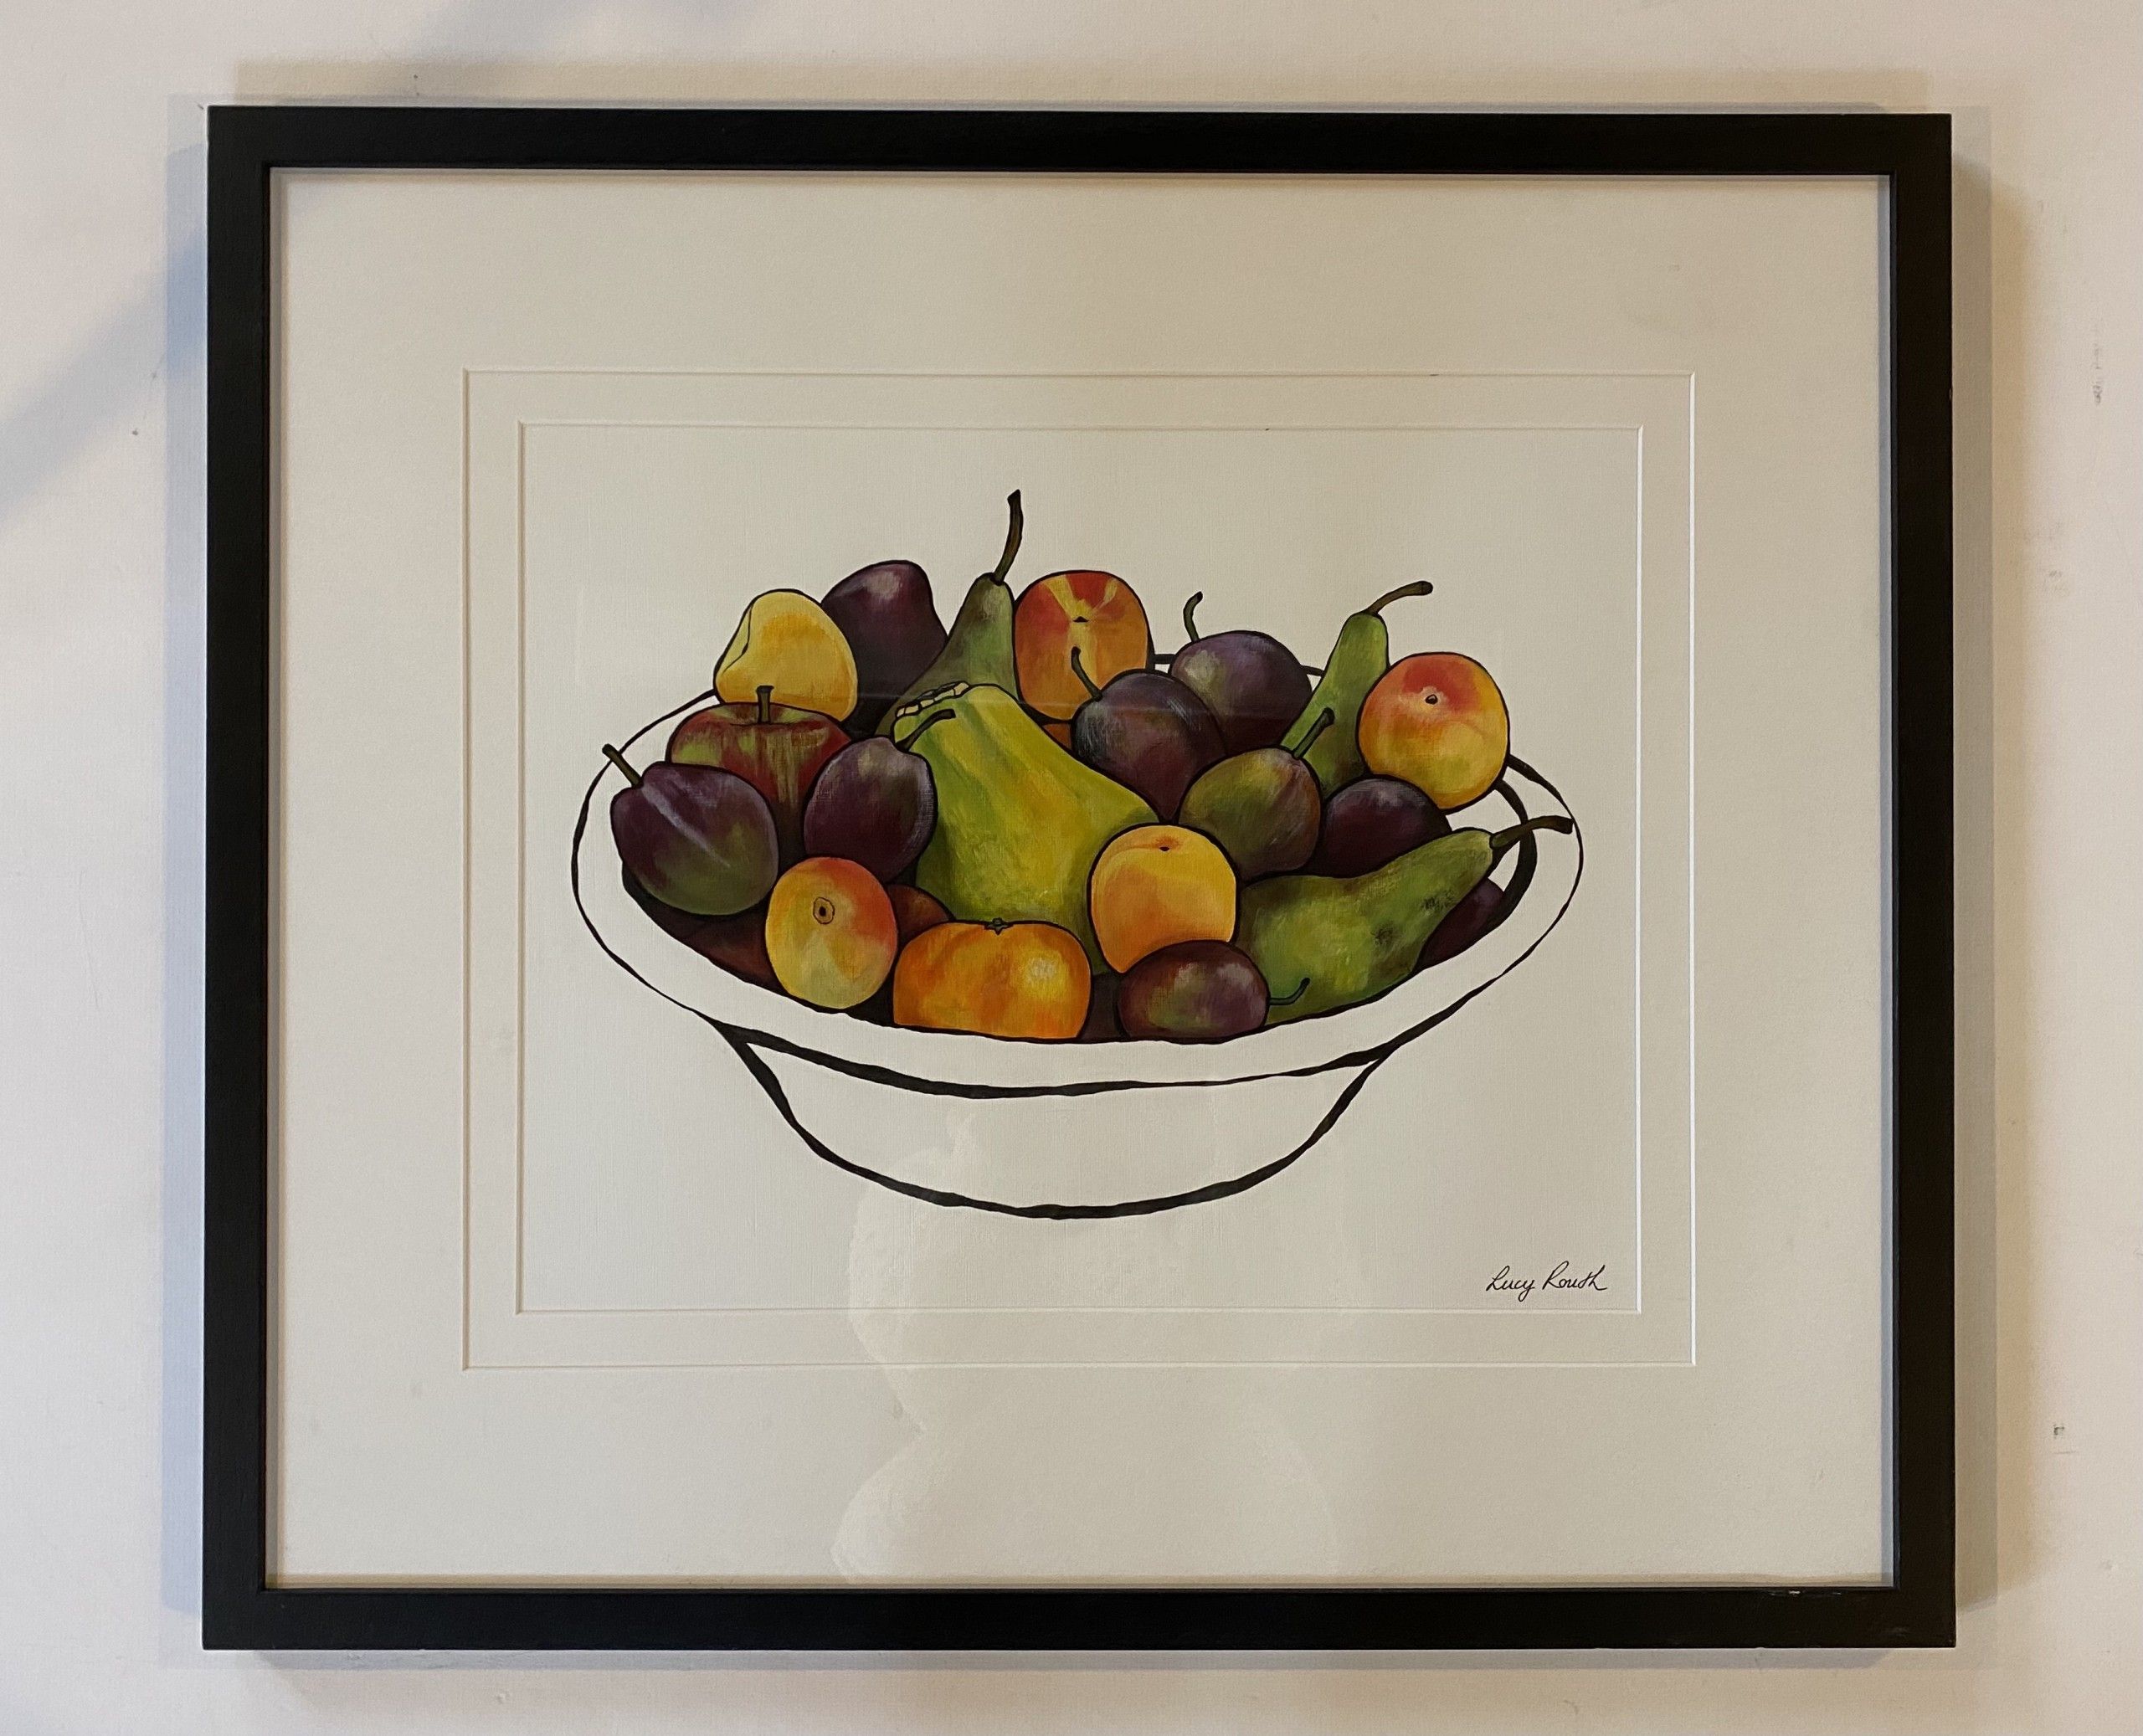 Fruit bowl with papaya by Lucy Routh - Secondary Image